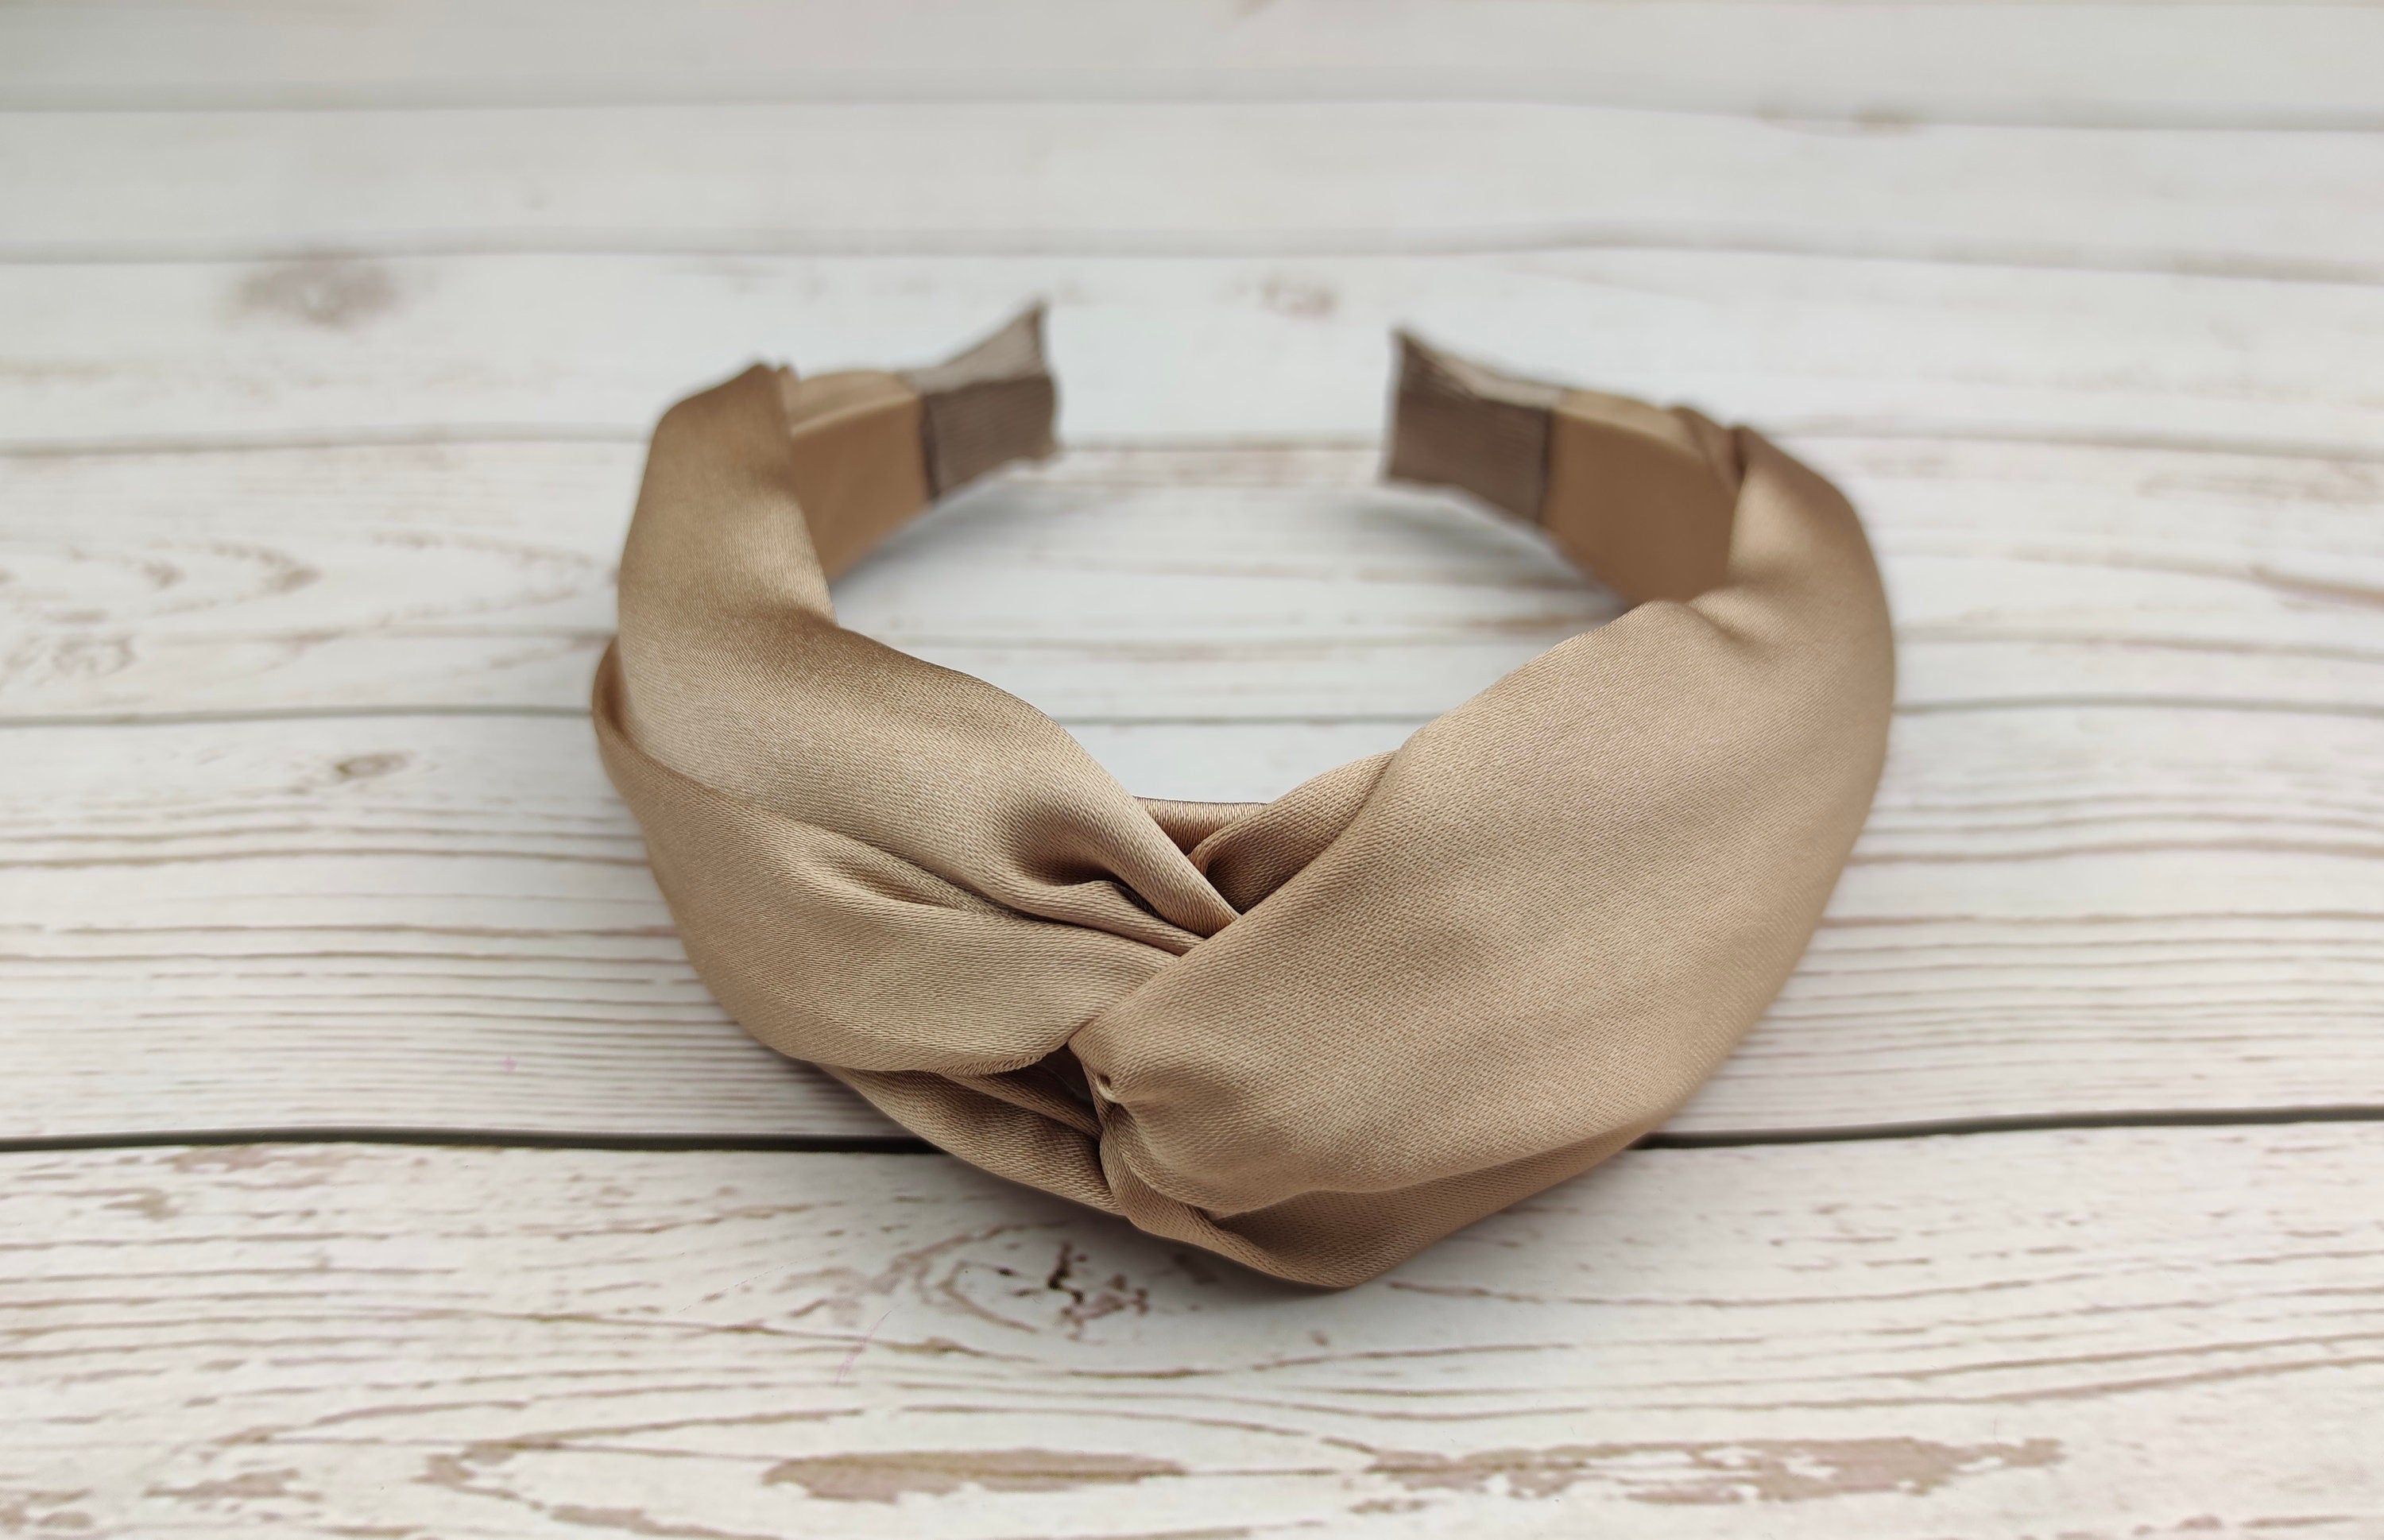 Make a fashion statement with our Beige Satin Knotted Headband. This headband features a chic knot design and a gorgeous cream color, perfect for any summer outfit. The soft and luxurious satin material is comfortable to wear all day long.